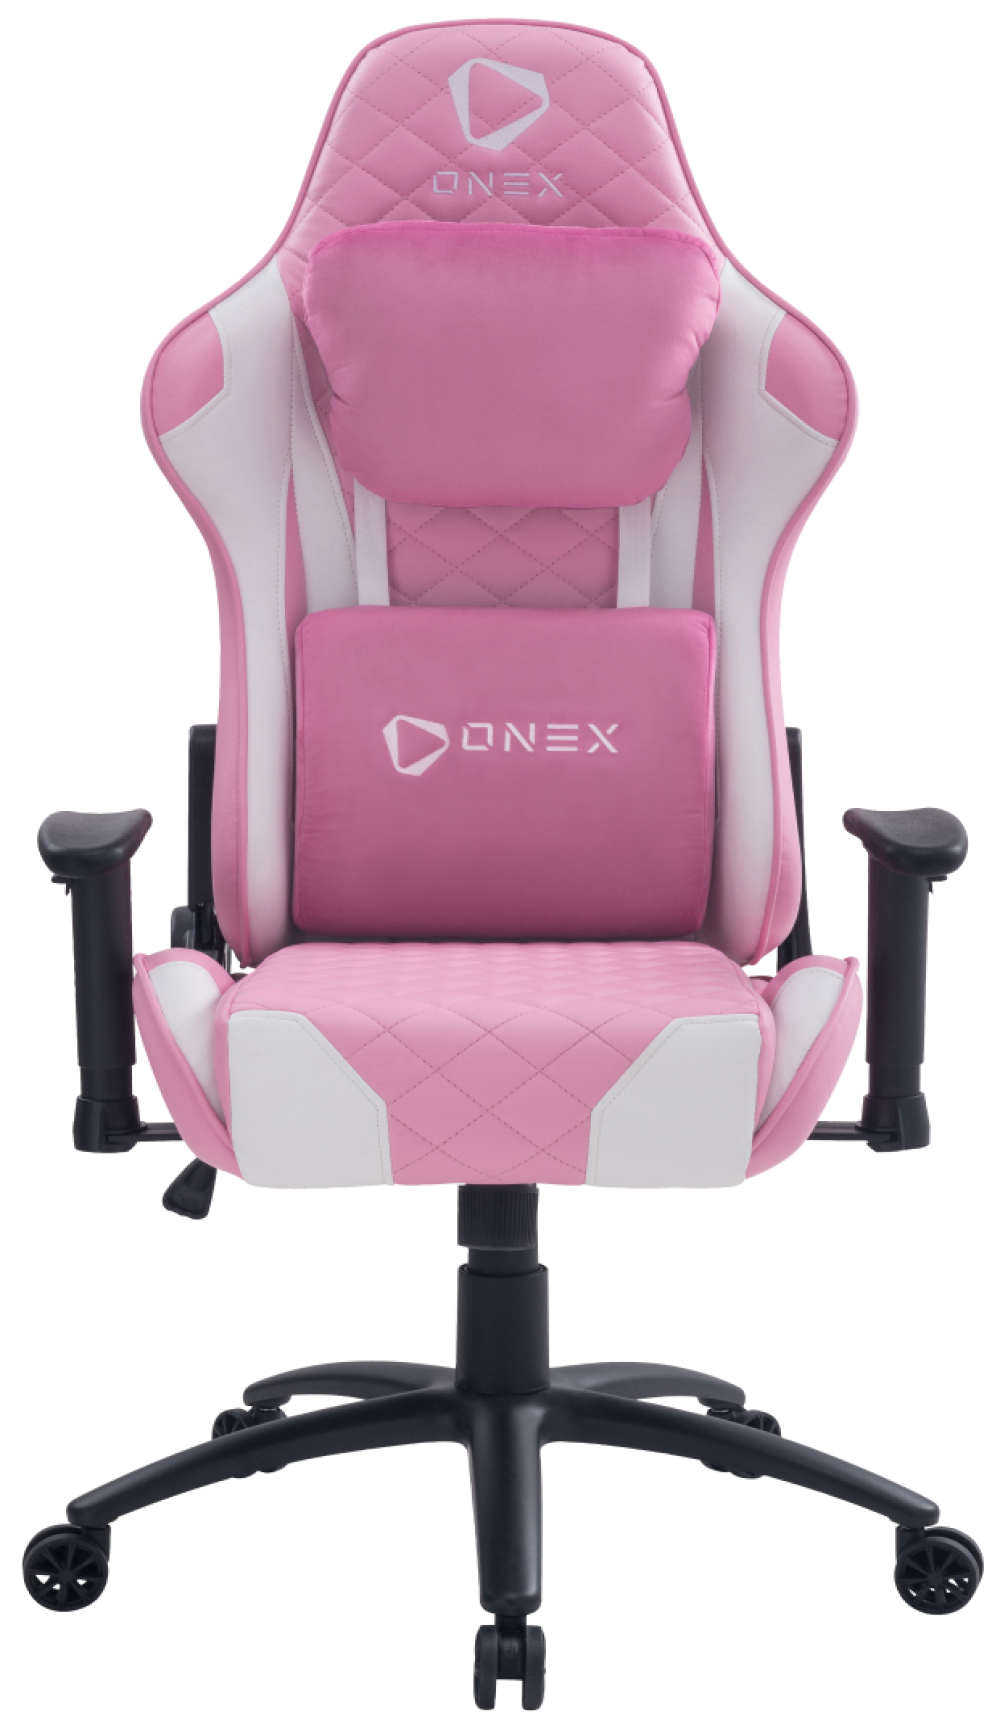  ONEX GX330 Gaming /Office Chair - Pink/White<BR><fONT COLOR='RED'>In-Store Pickup Not Available - Delivery Only (Freight Charges Apply)  